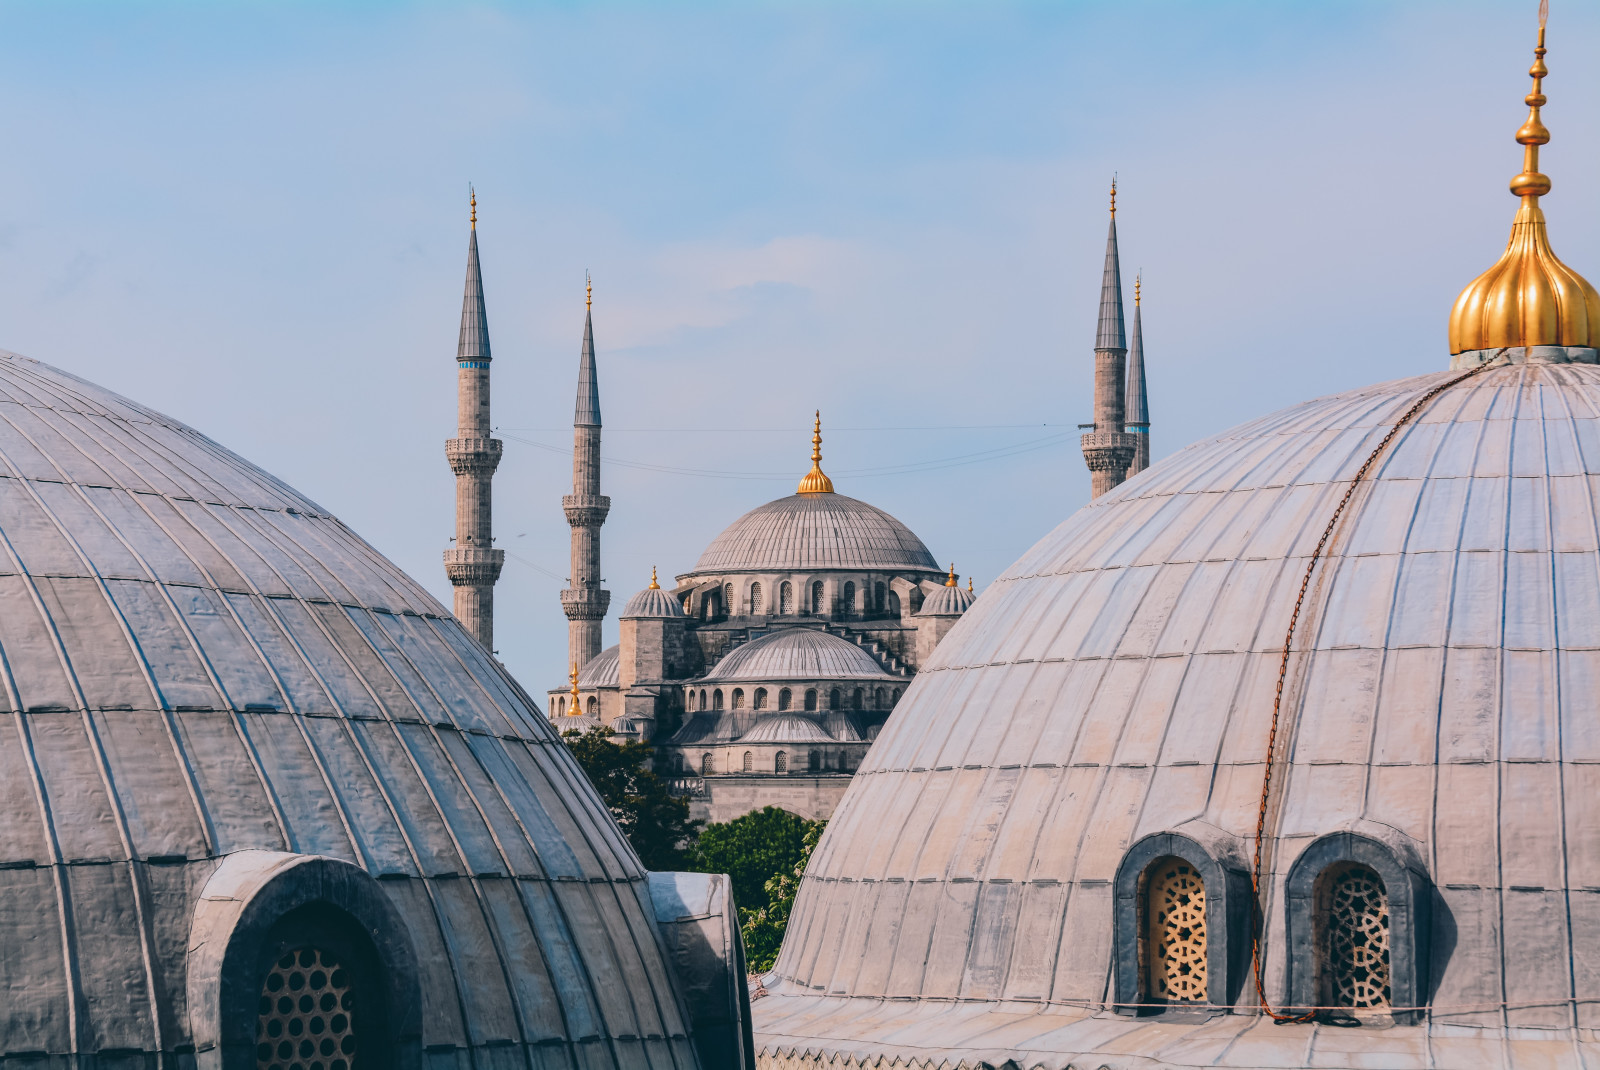 Circular buildings with grey roofs and gold pointed toppers in Istanbul